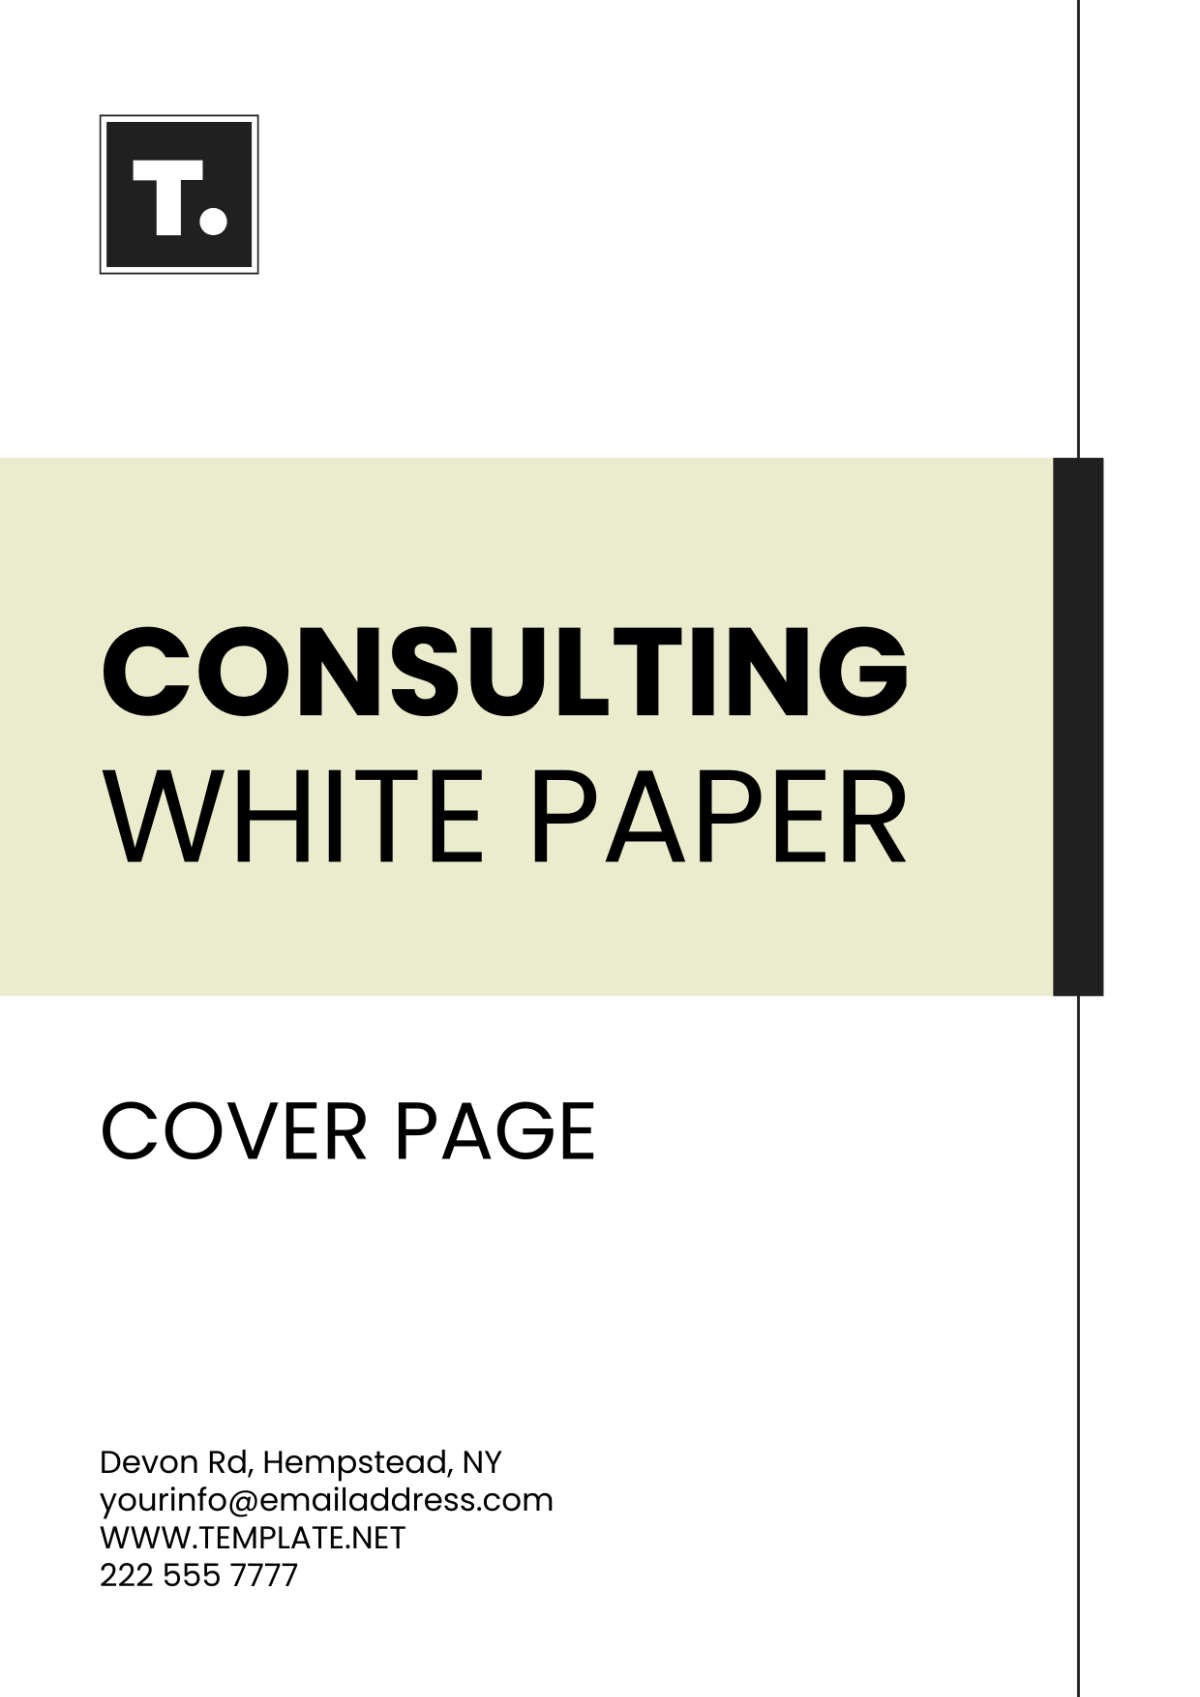 Consulting White Paper Cover Page